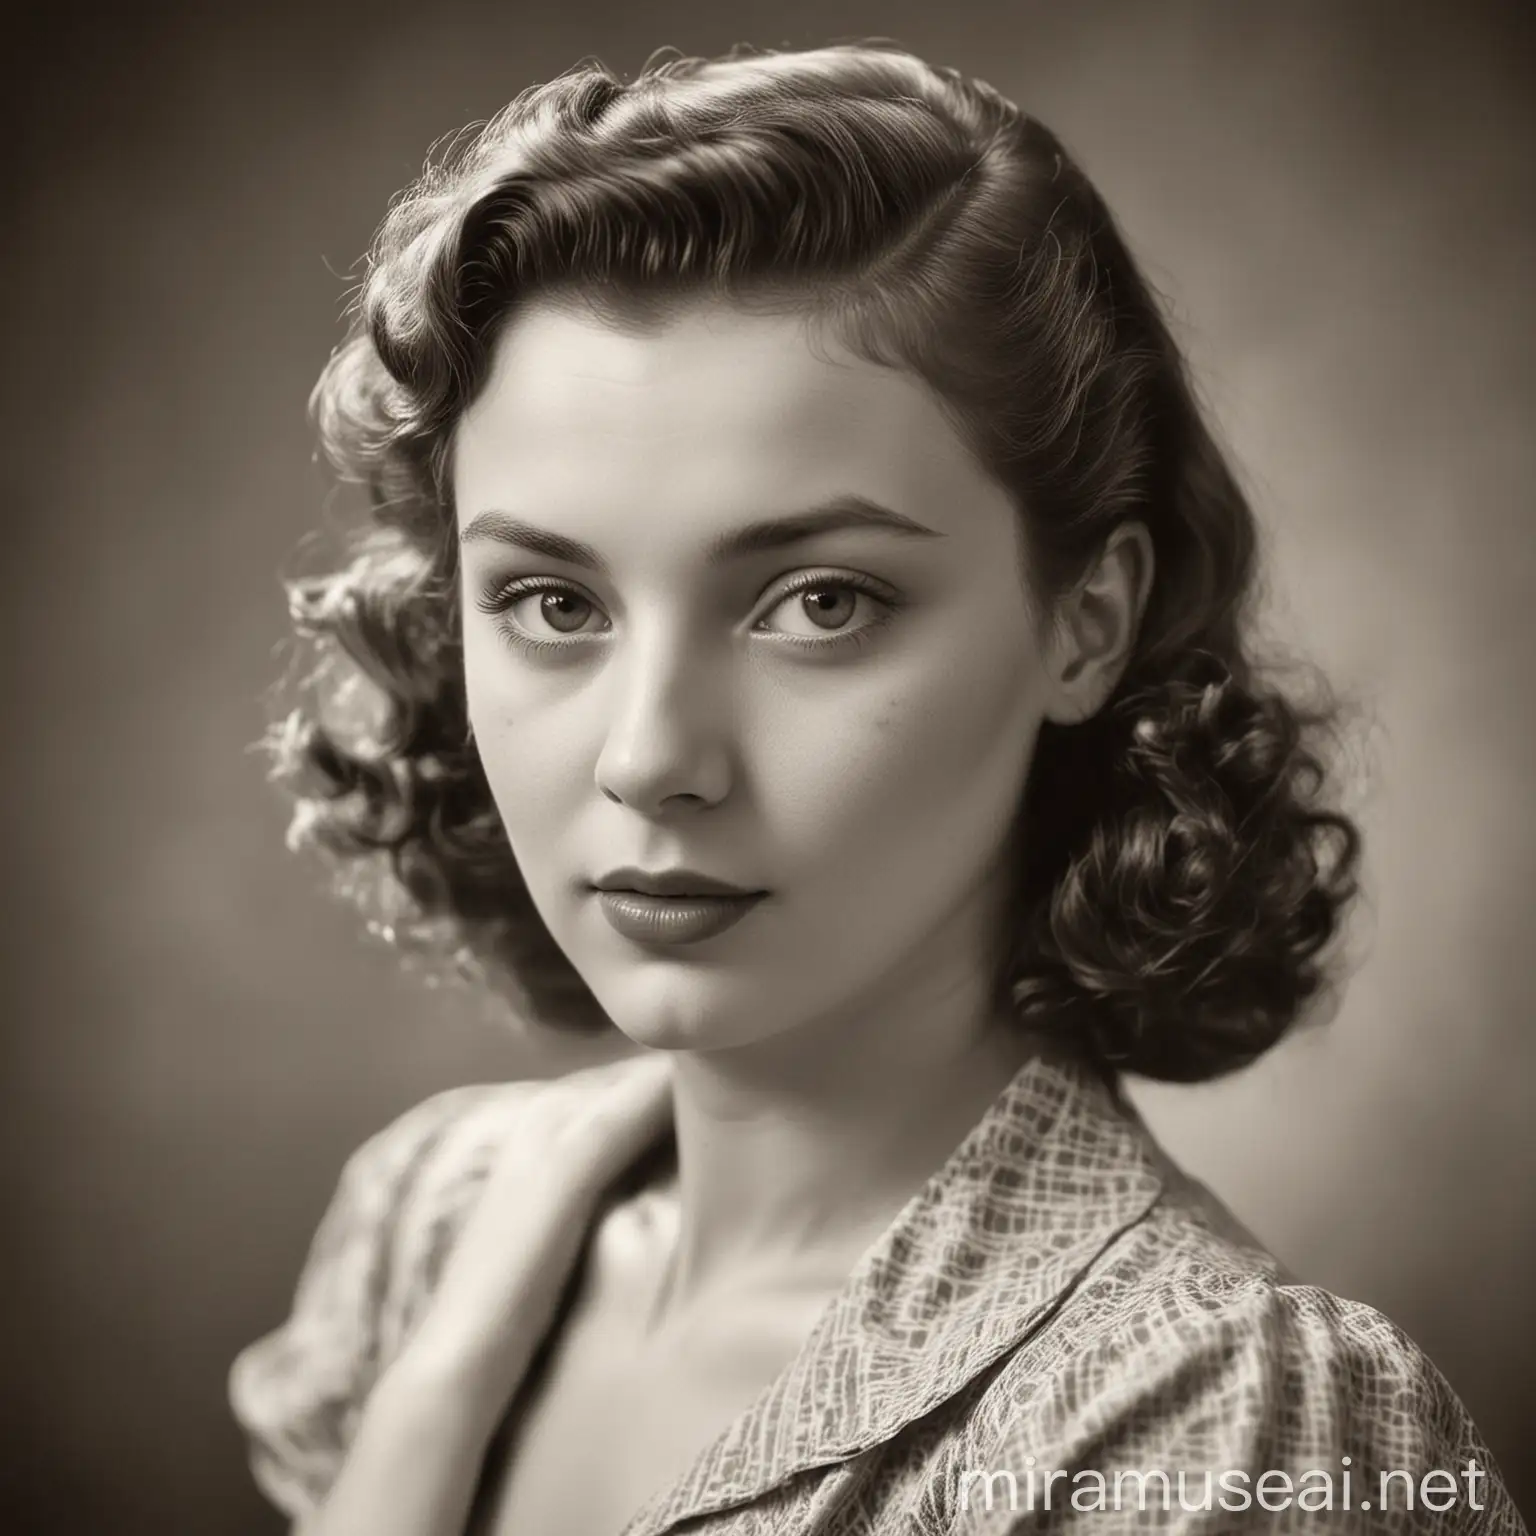 beautiful young woman from the 1940s, realistic, vintage bw photograph